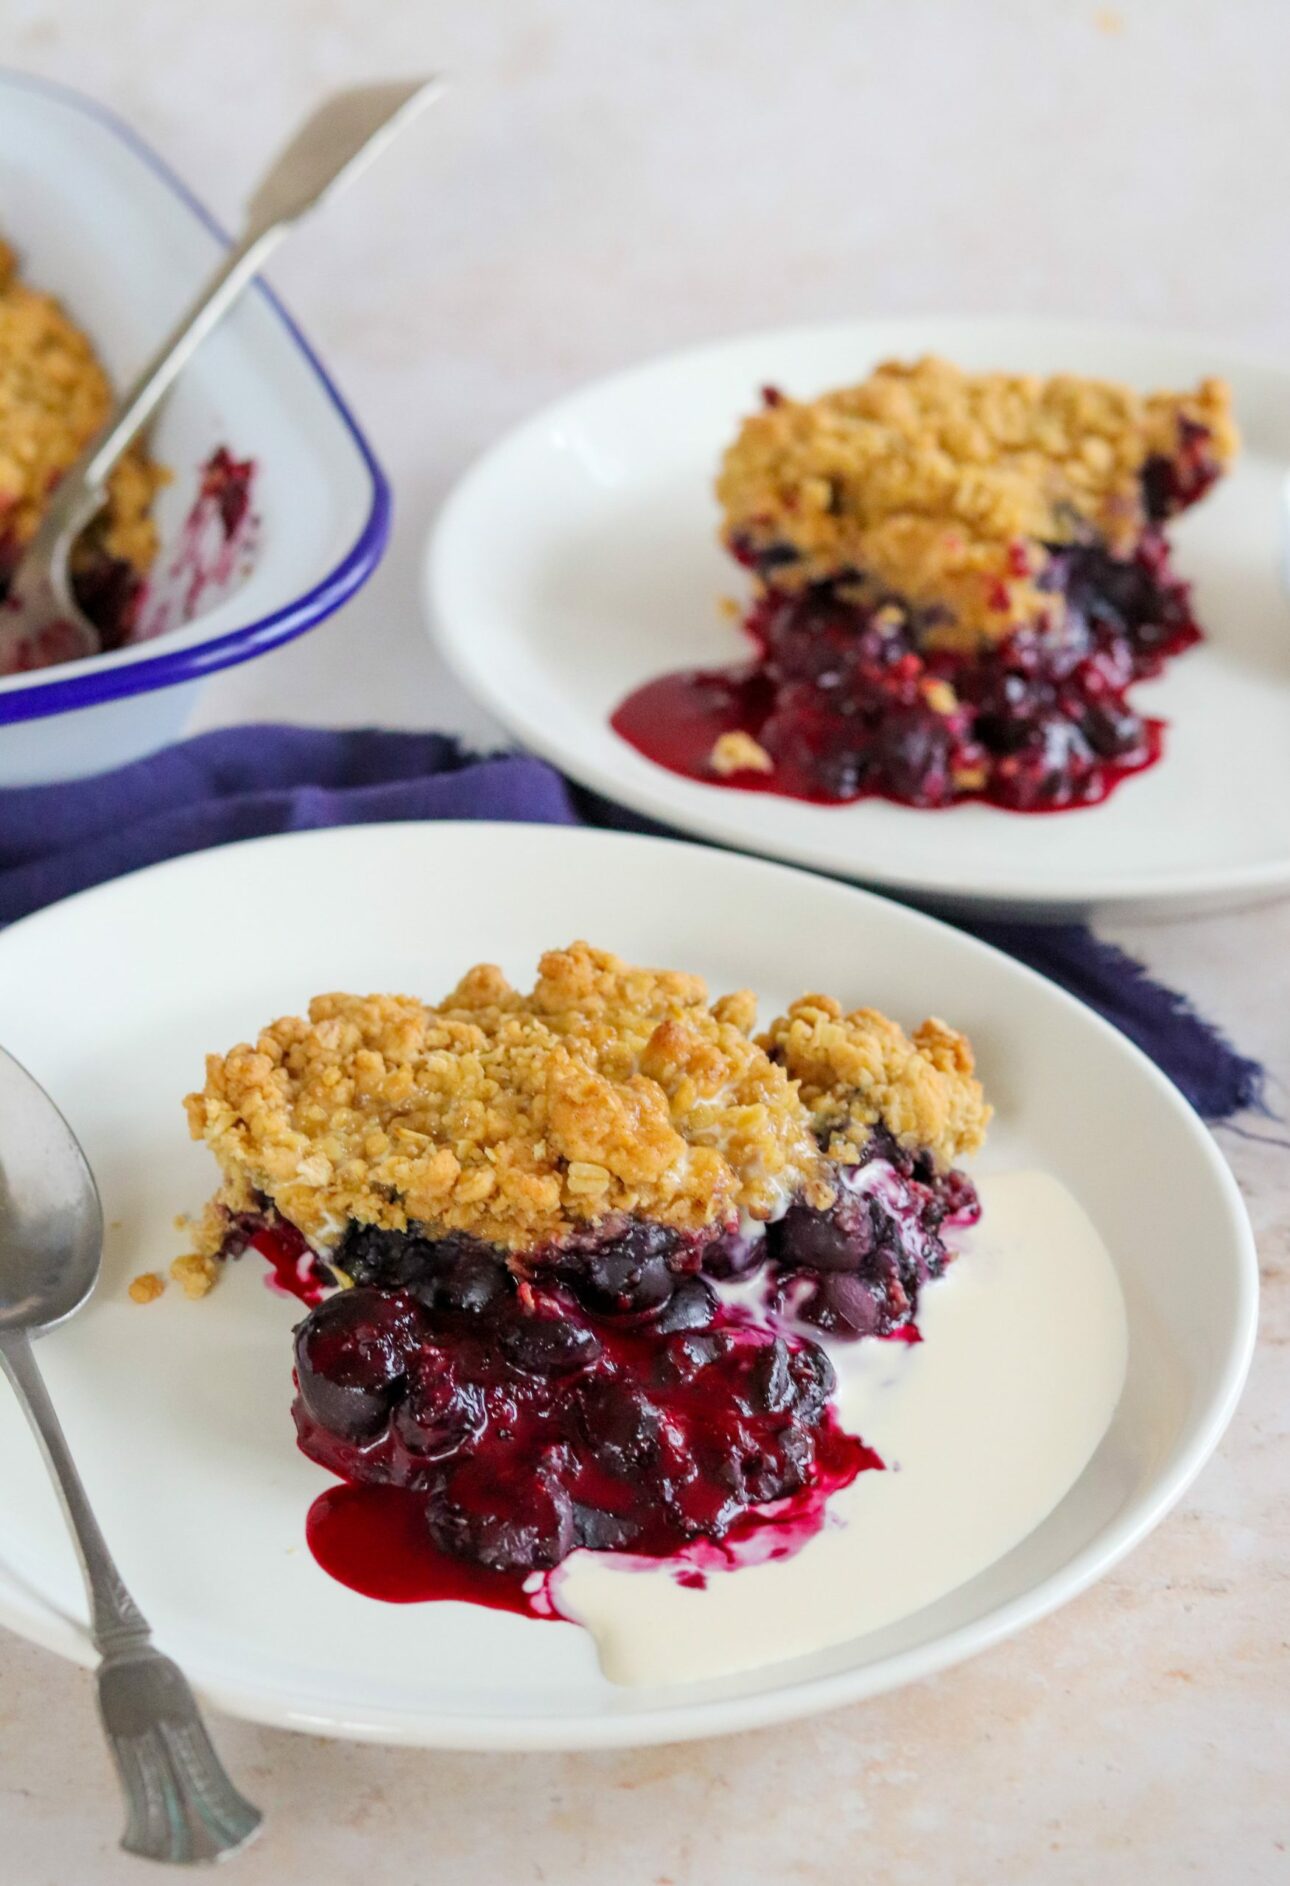 Blueberry Crumble with Oats by Curly's Cooking // FoodNouveau.com